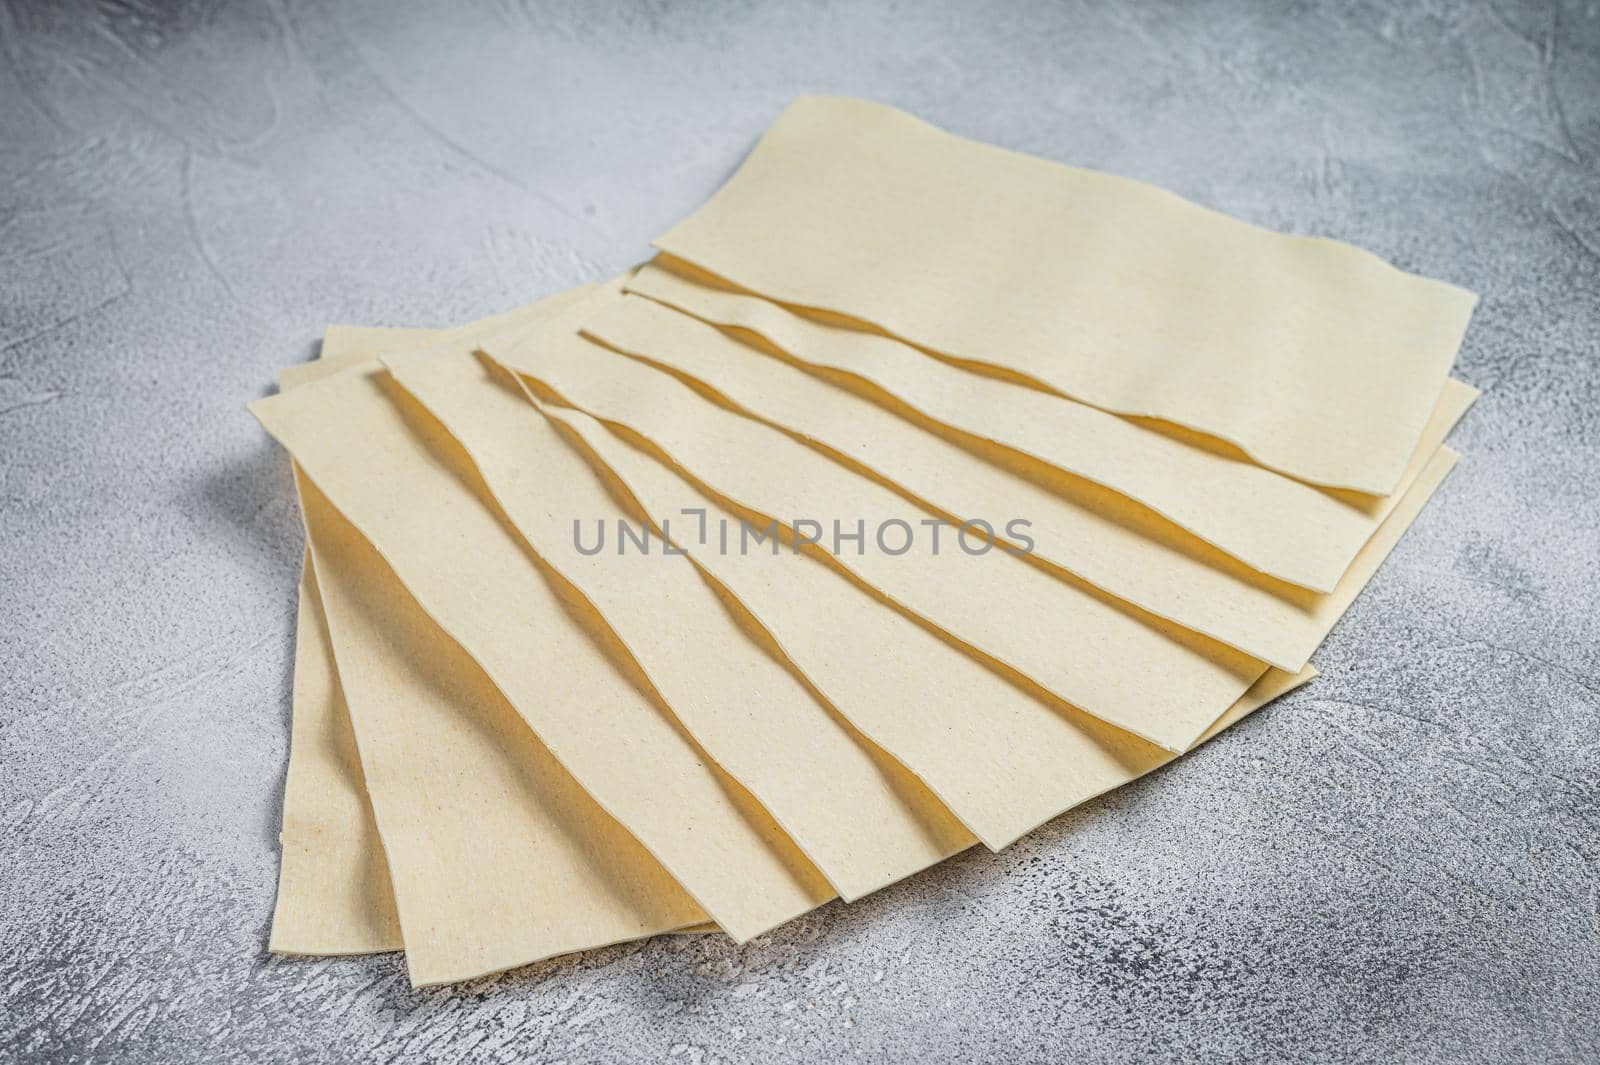 Raw lasagna sheets stack on a kitchen table. White background. Top view by Composter